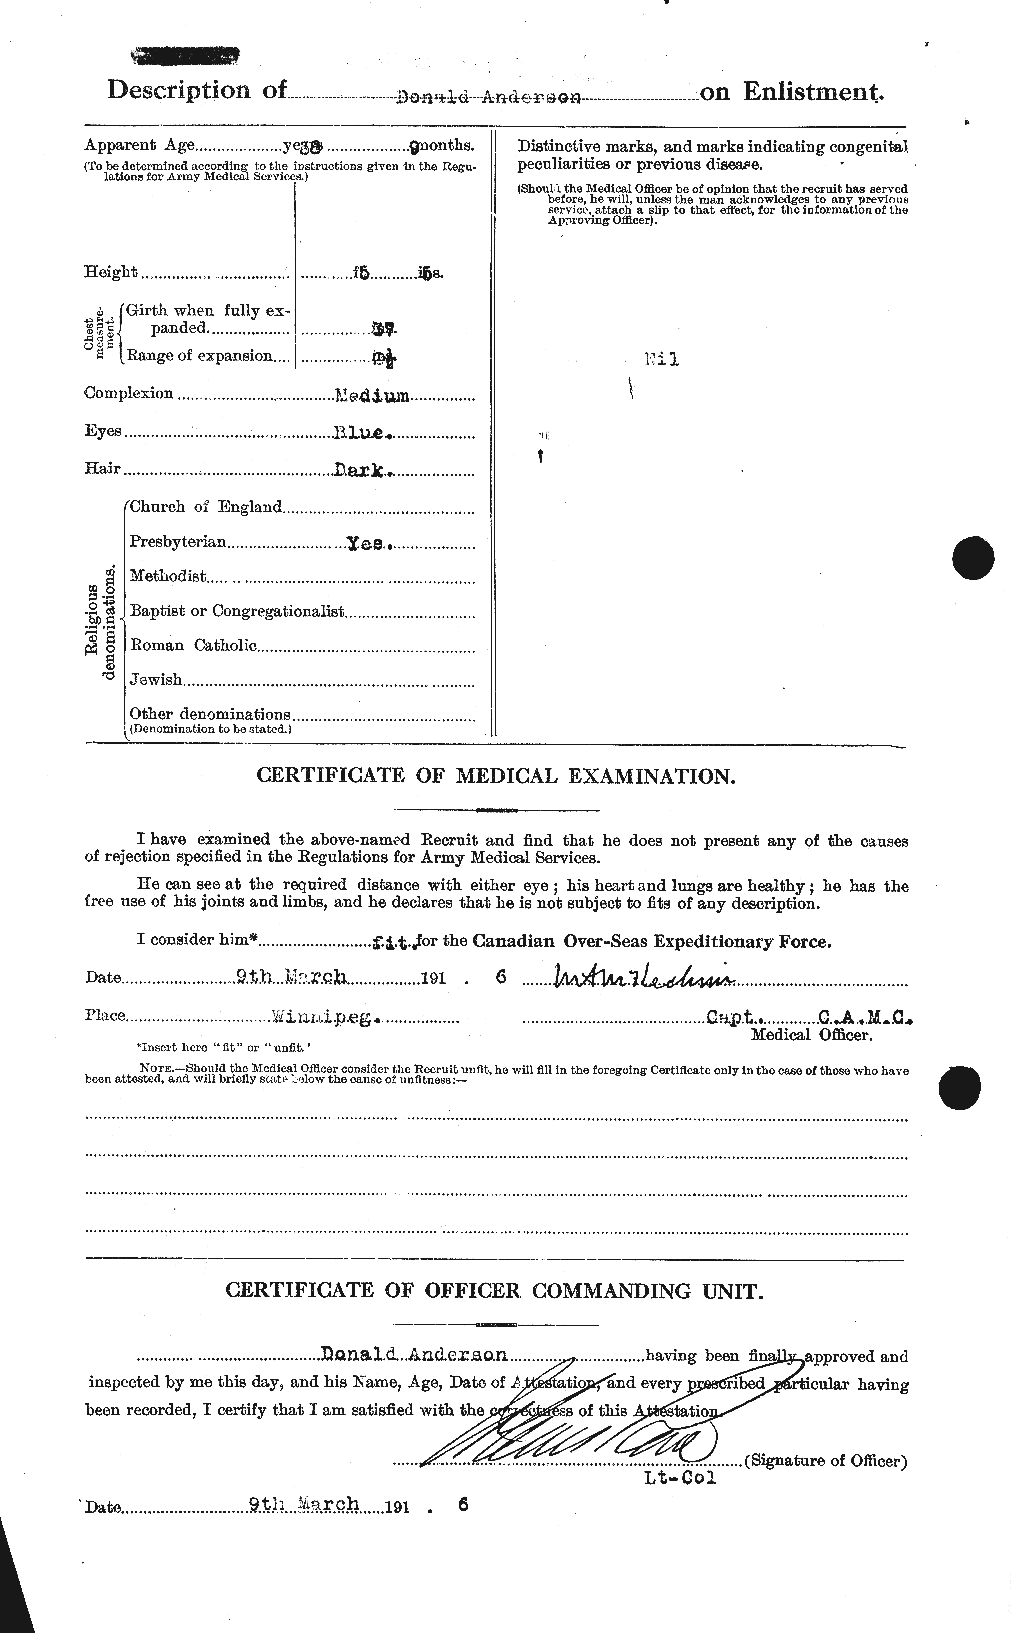 Personnel Records of the First World War - CEF 209988b